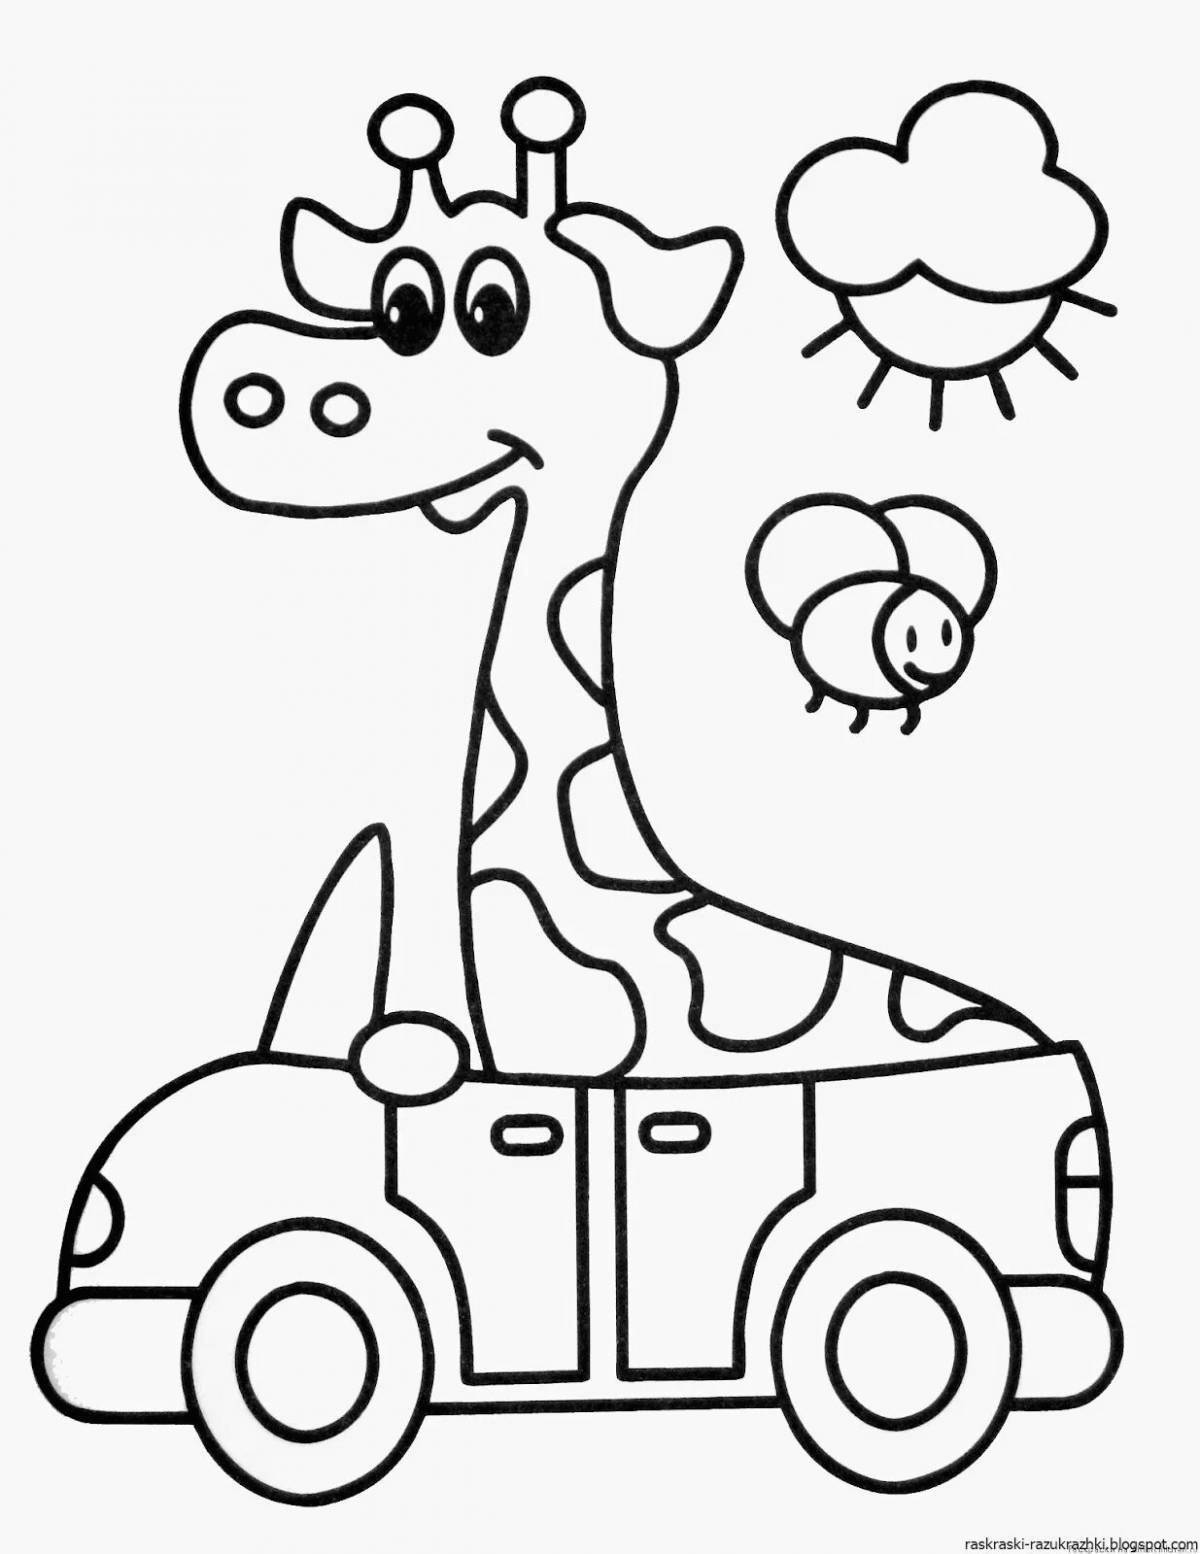 Colorful cars 2 coloring book